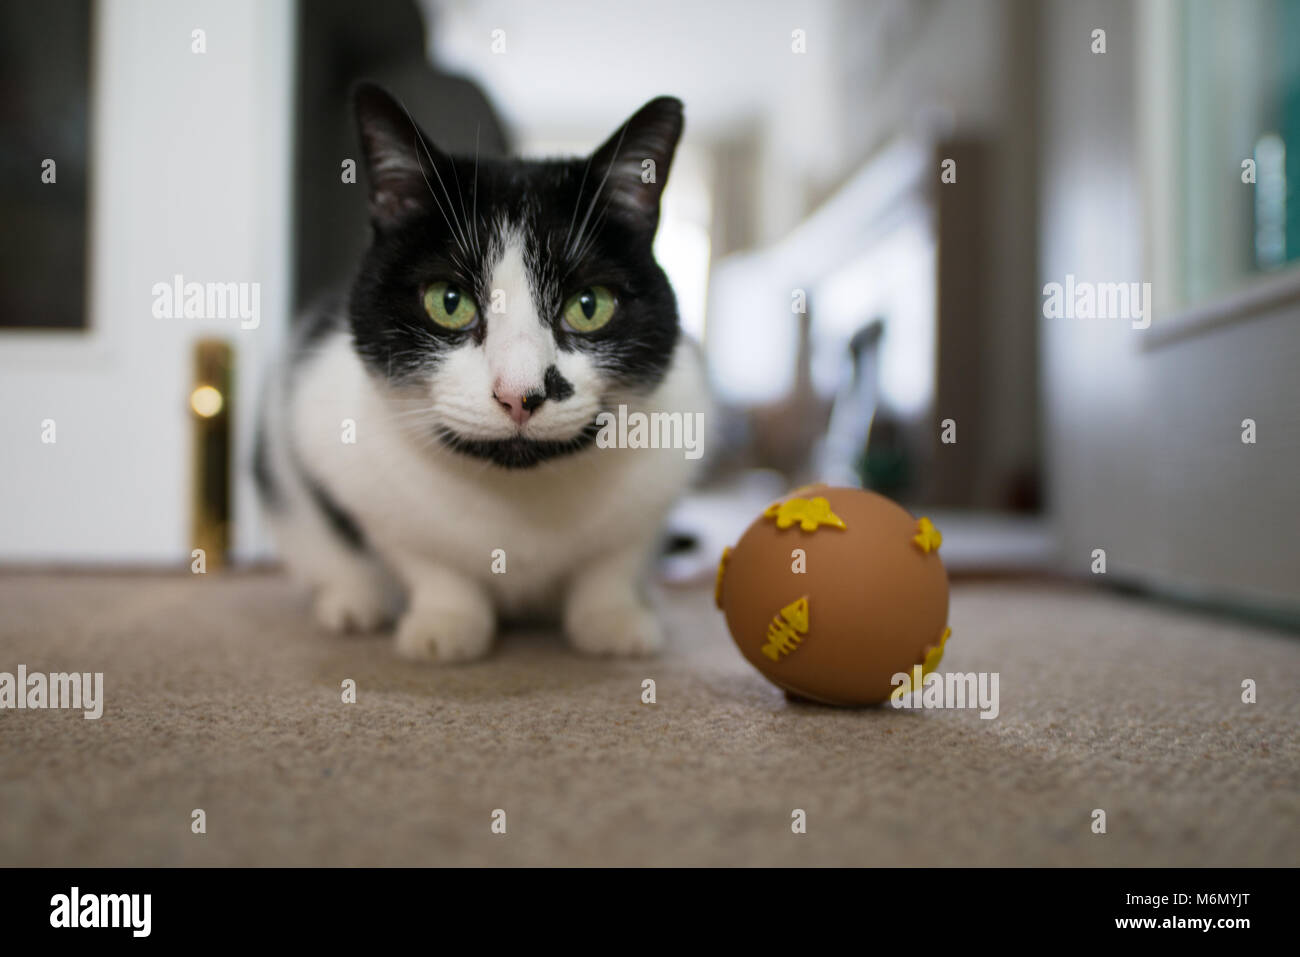 Cat looking at fish ball toy Stock Photo